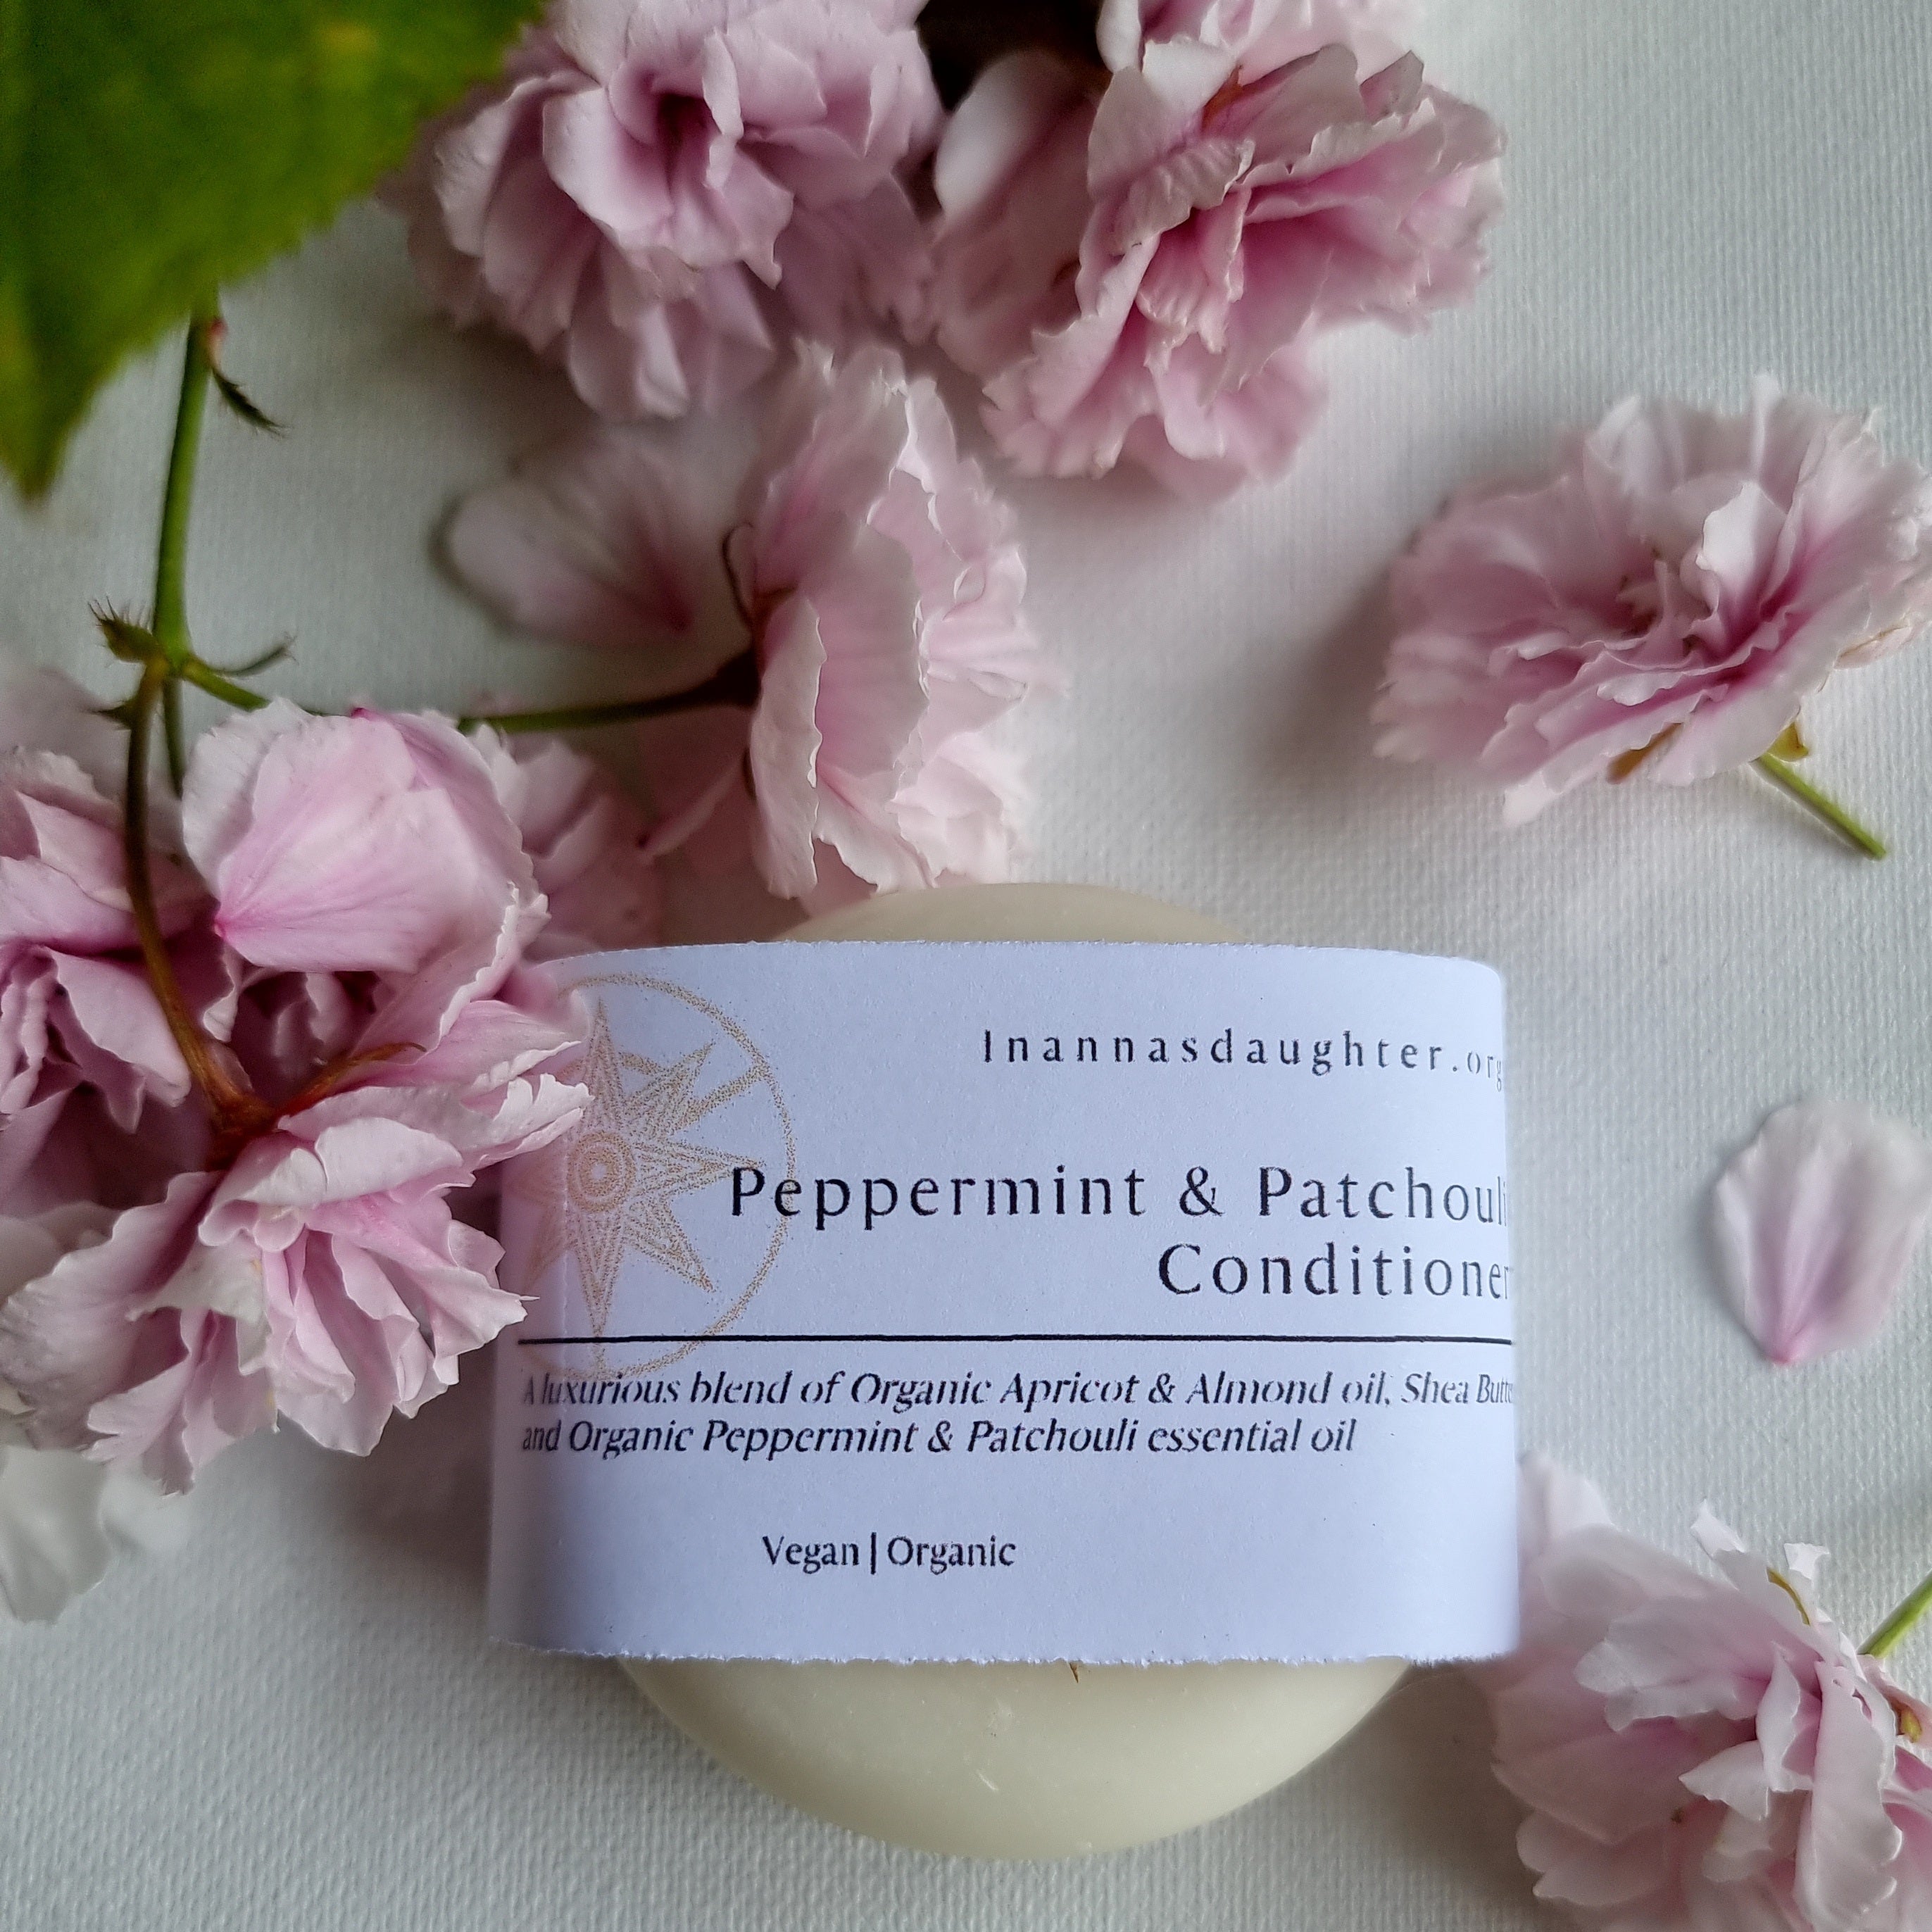 Peppermint and Patchouli Conditioner